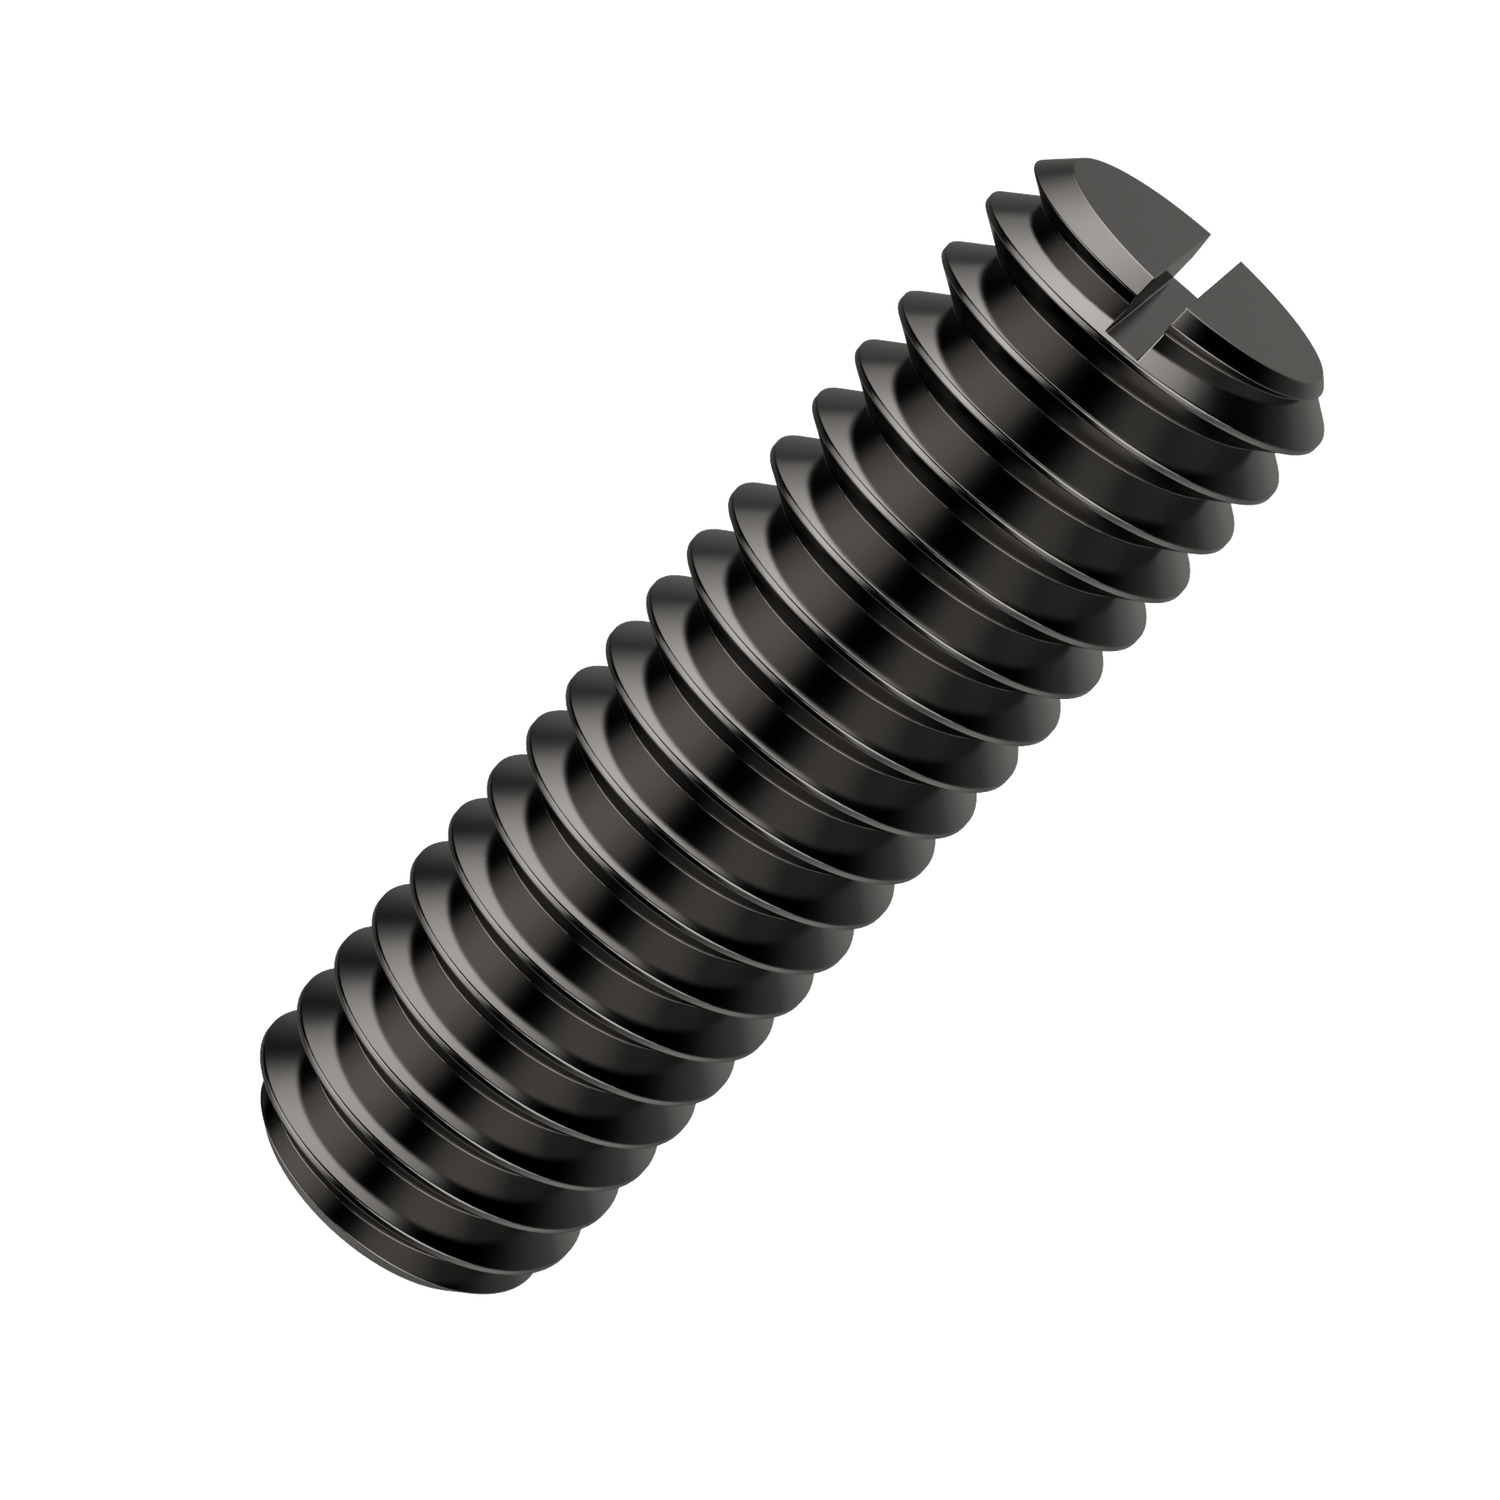 Product 34300, Grub Screws Threaded Rods with slot end / 